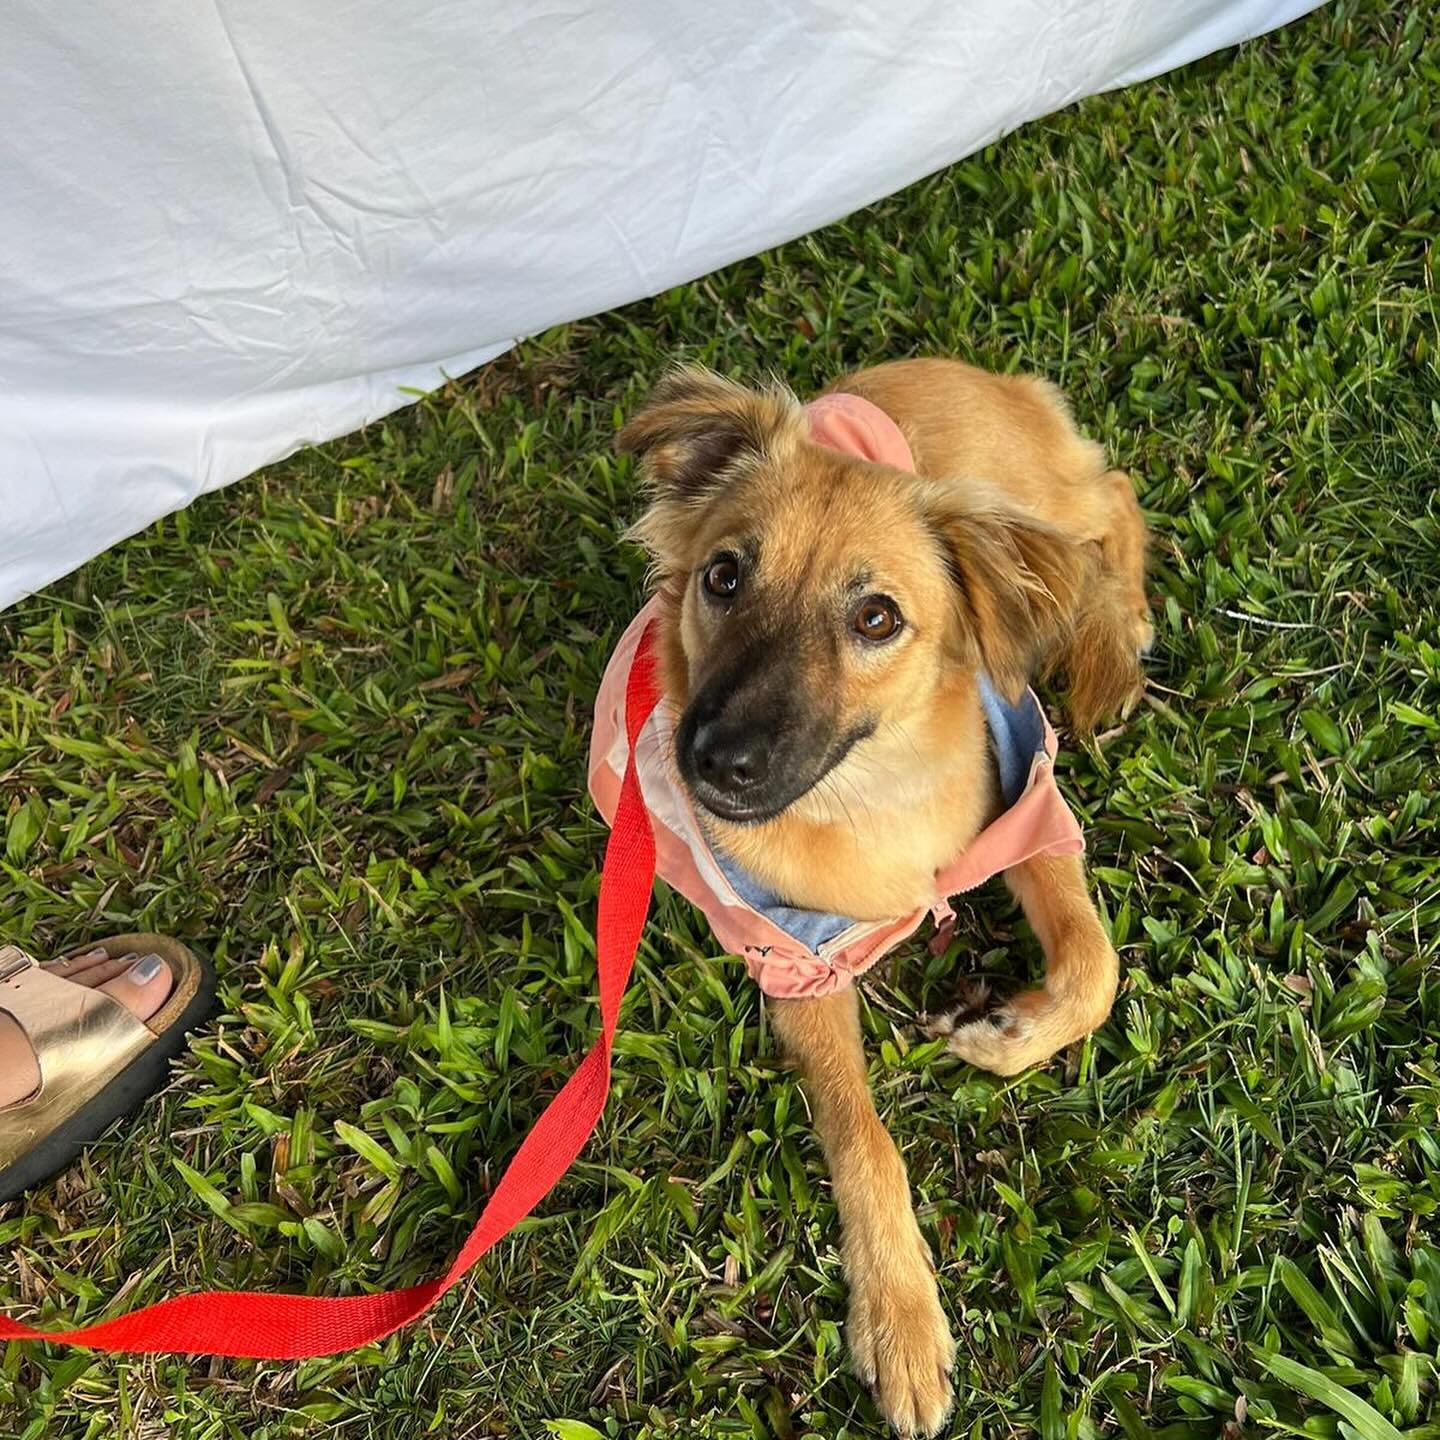 🐾Celebrating National Pet Week: Foxy 🐶🐾

Foxy was originally in the shelter and on euthanasia row, she quickly captured Lauren&rsquo;s heart and was the sweetest clinic volunteer after a mouth full of stolen croissant.

Now she lives with her owne